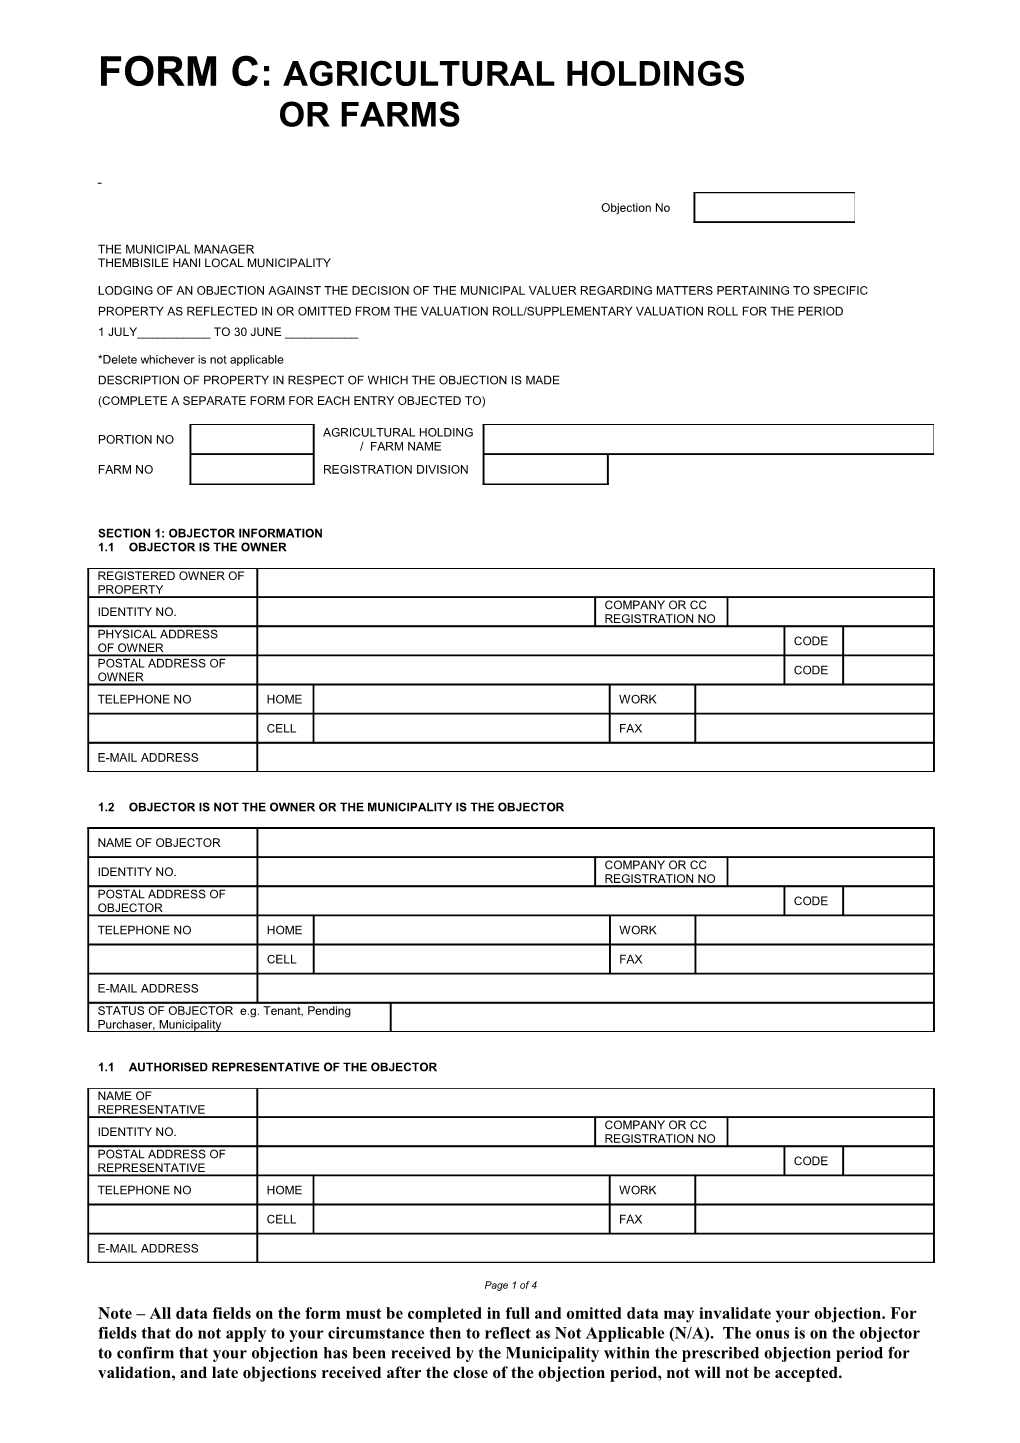 Form C: Agricultural Holdings